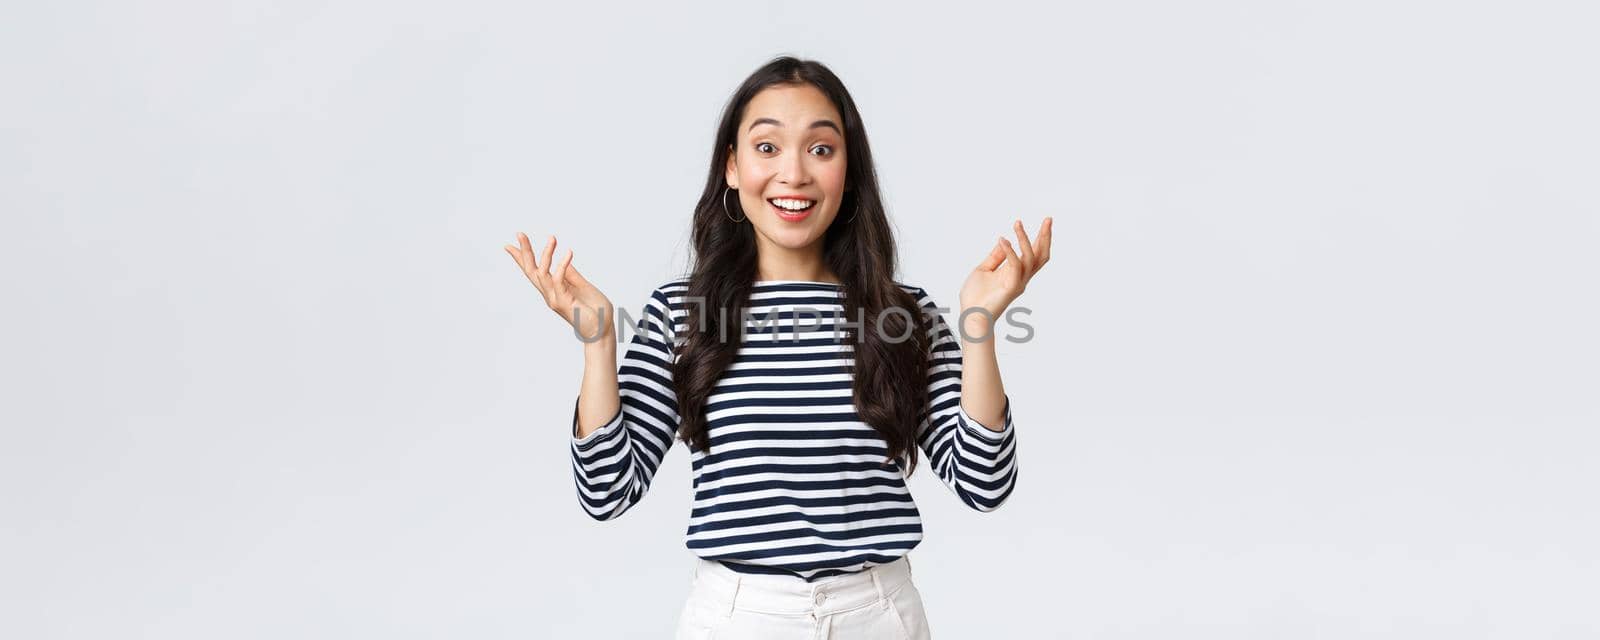 Lifestyle, beauty and fashion, people emotions concept. Surprised and amazed happy smiling asian woman find out perfect news, raise hands up astonished, congratulating or praising friend.